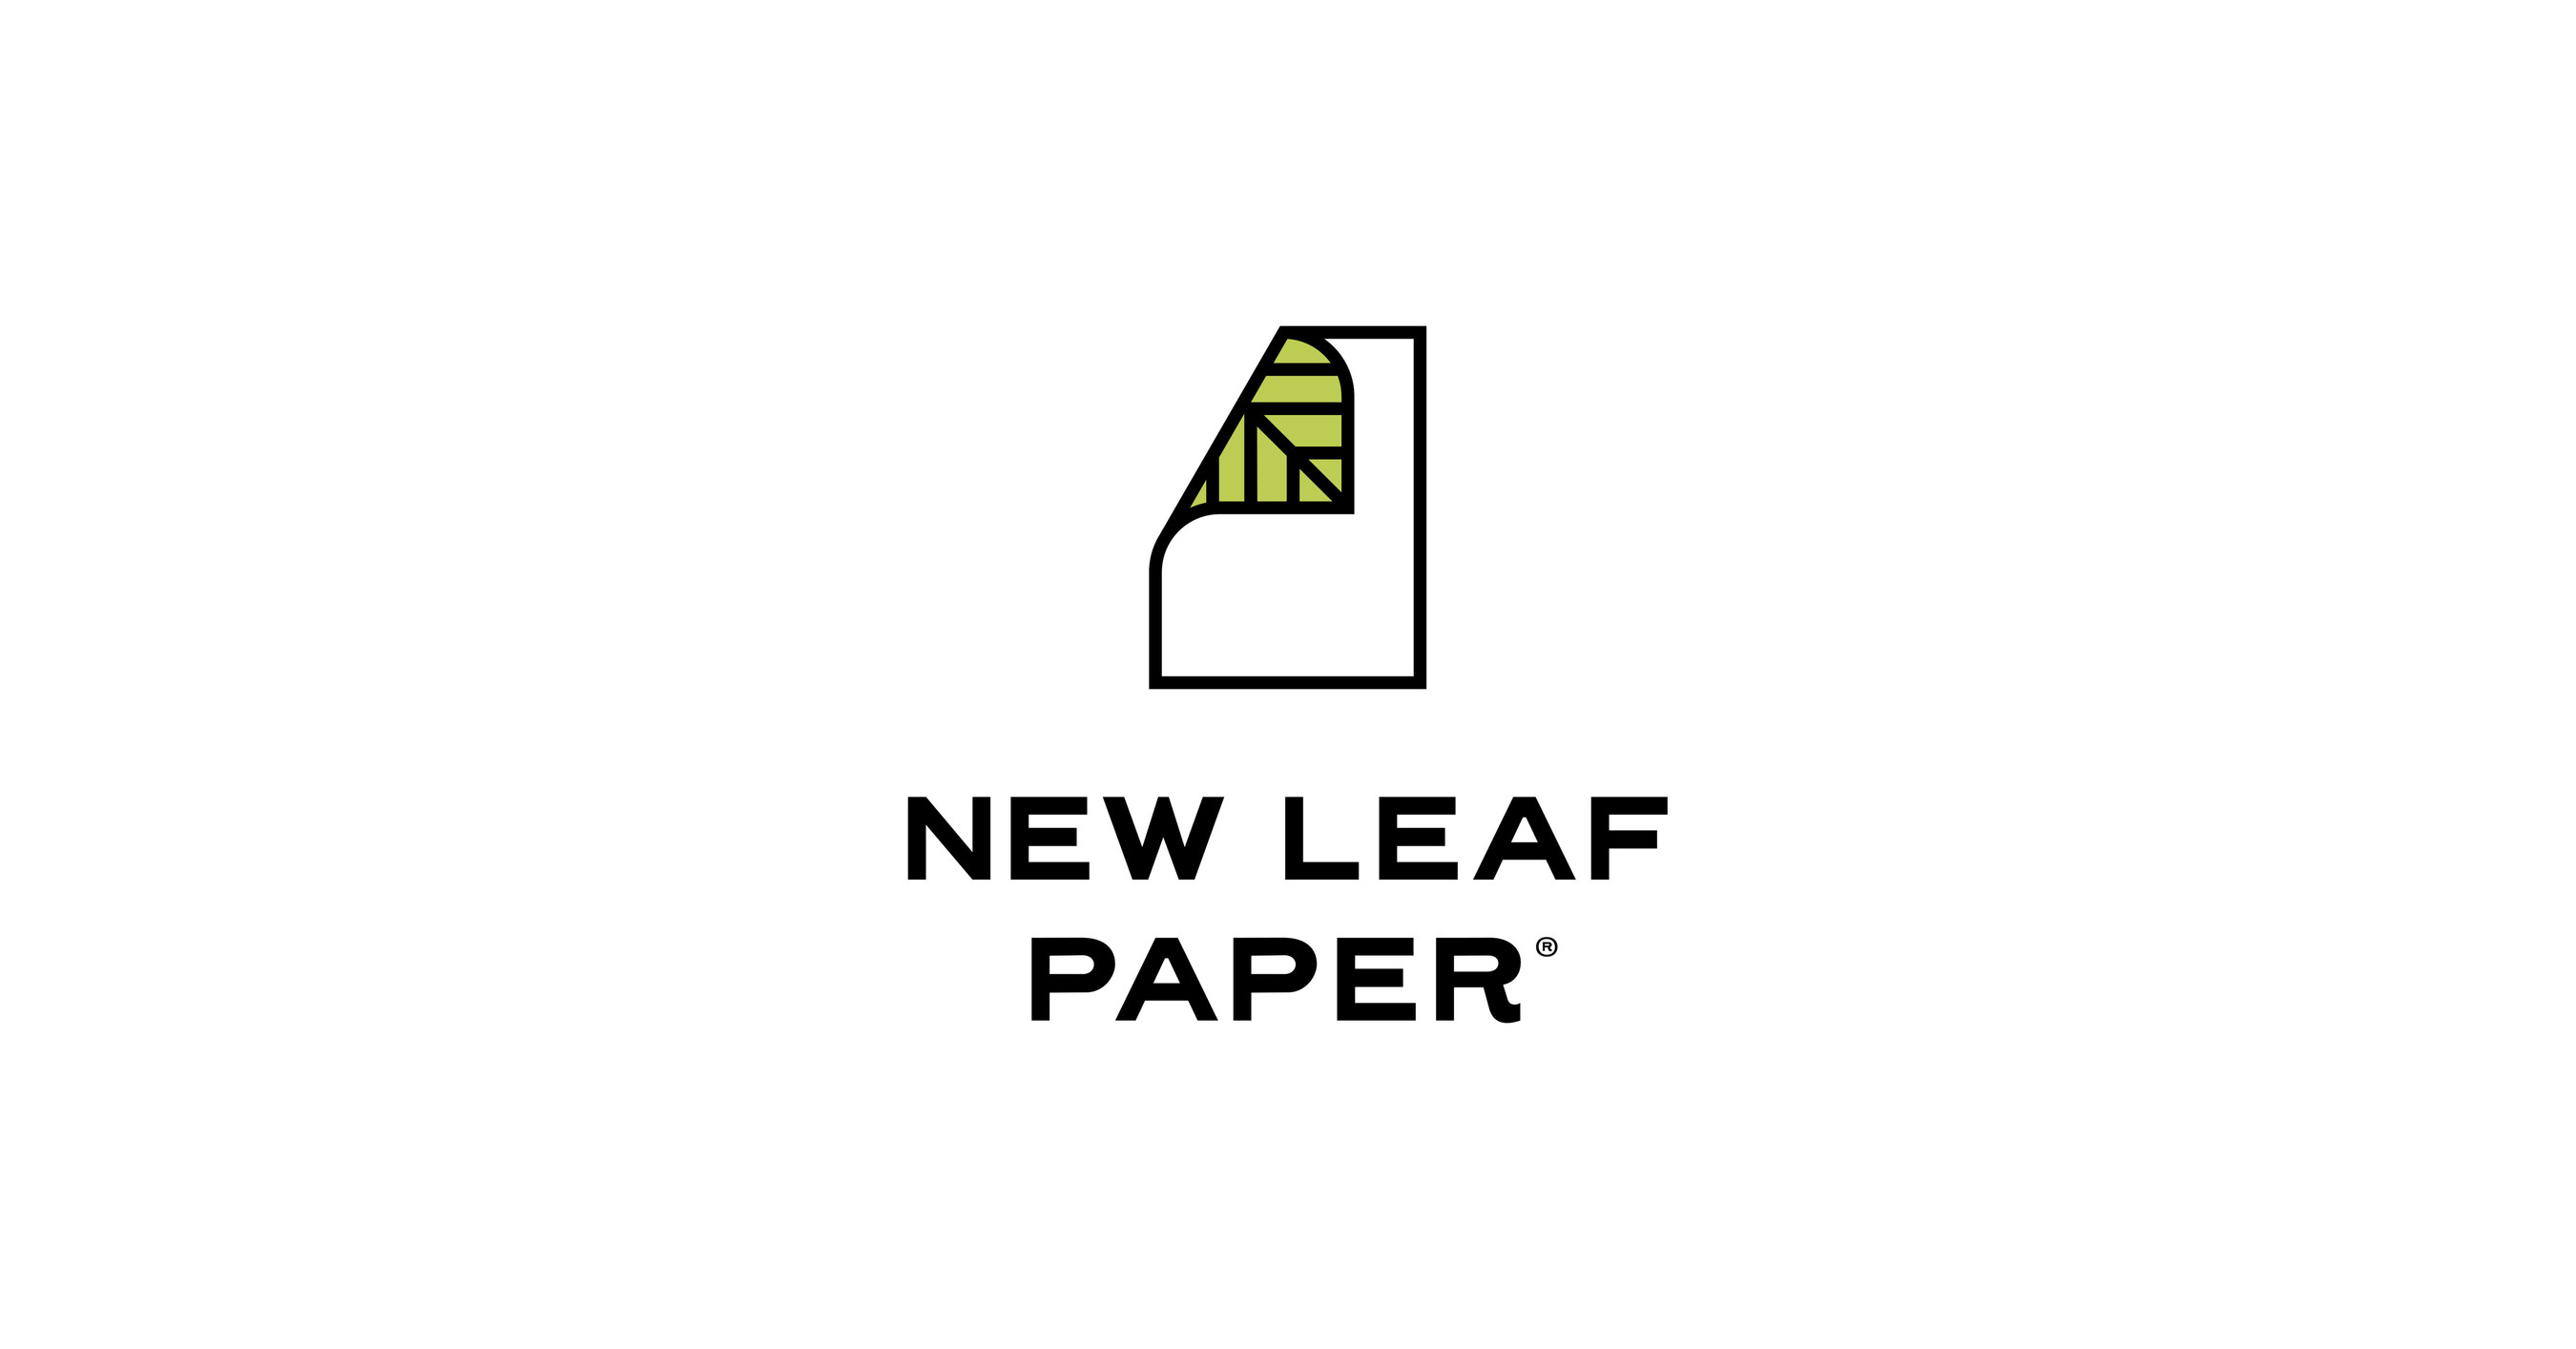 New Leaf Paper Reveals Positive Impacts on Climate Change - PRNewswire